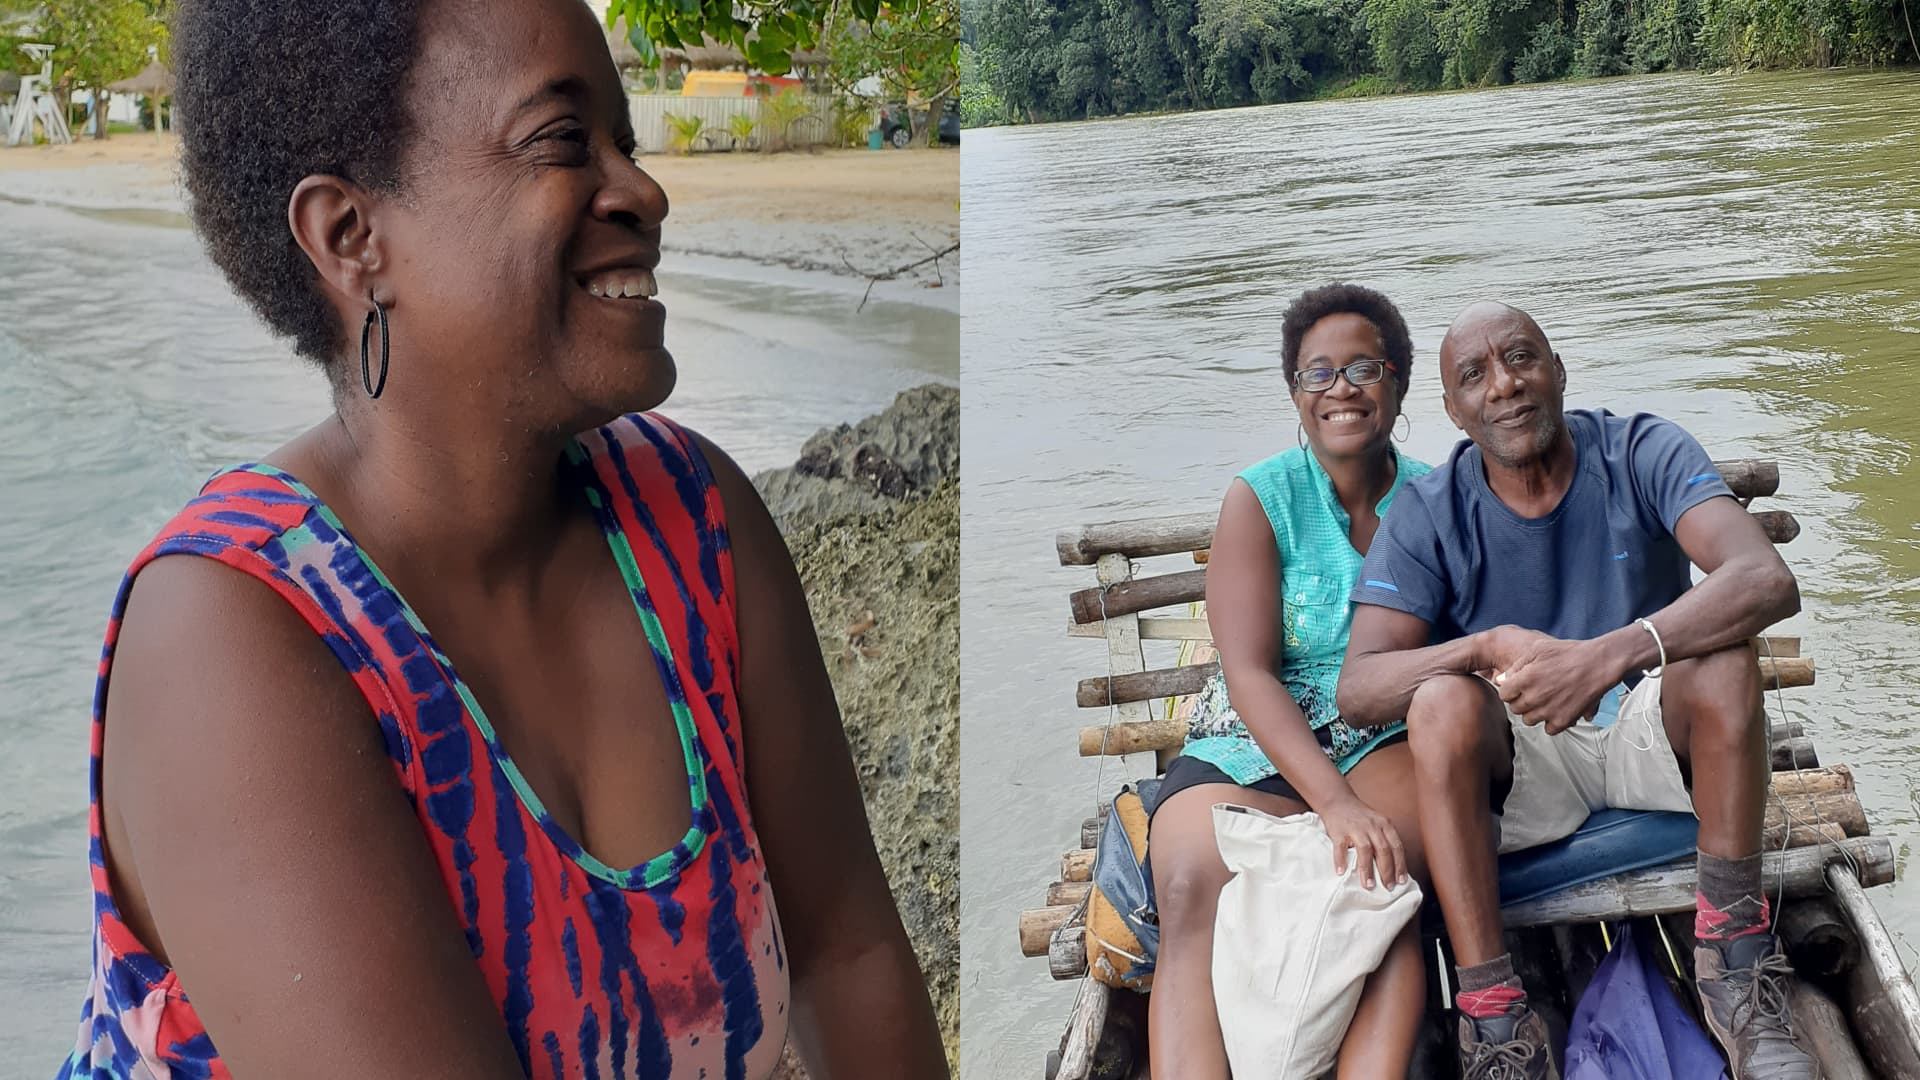 Nance-Nash and her husband live in Robin's Bay, Jamaica, an area she describes as rural and off the tourist track.